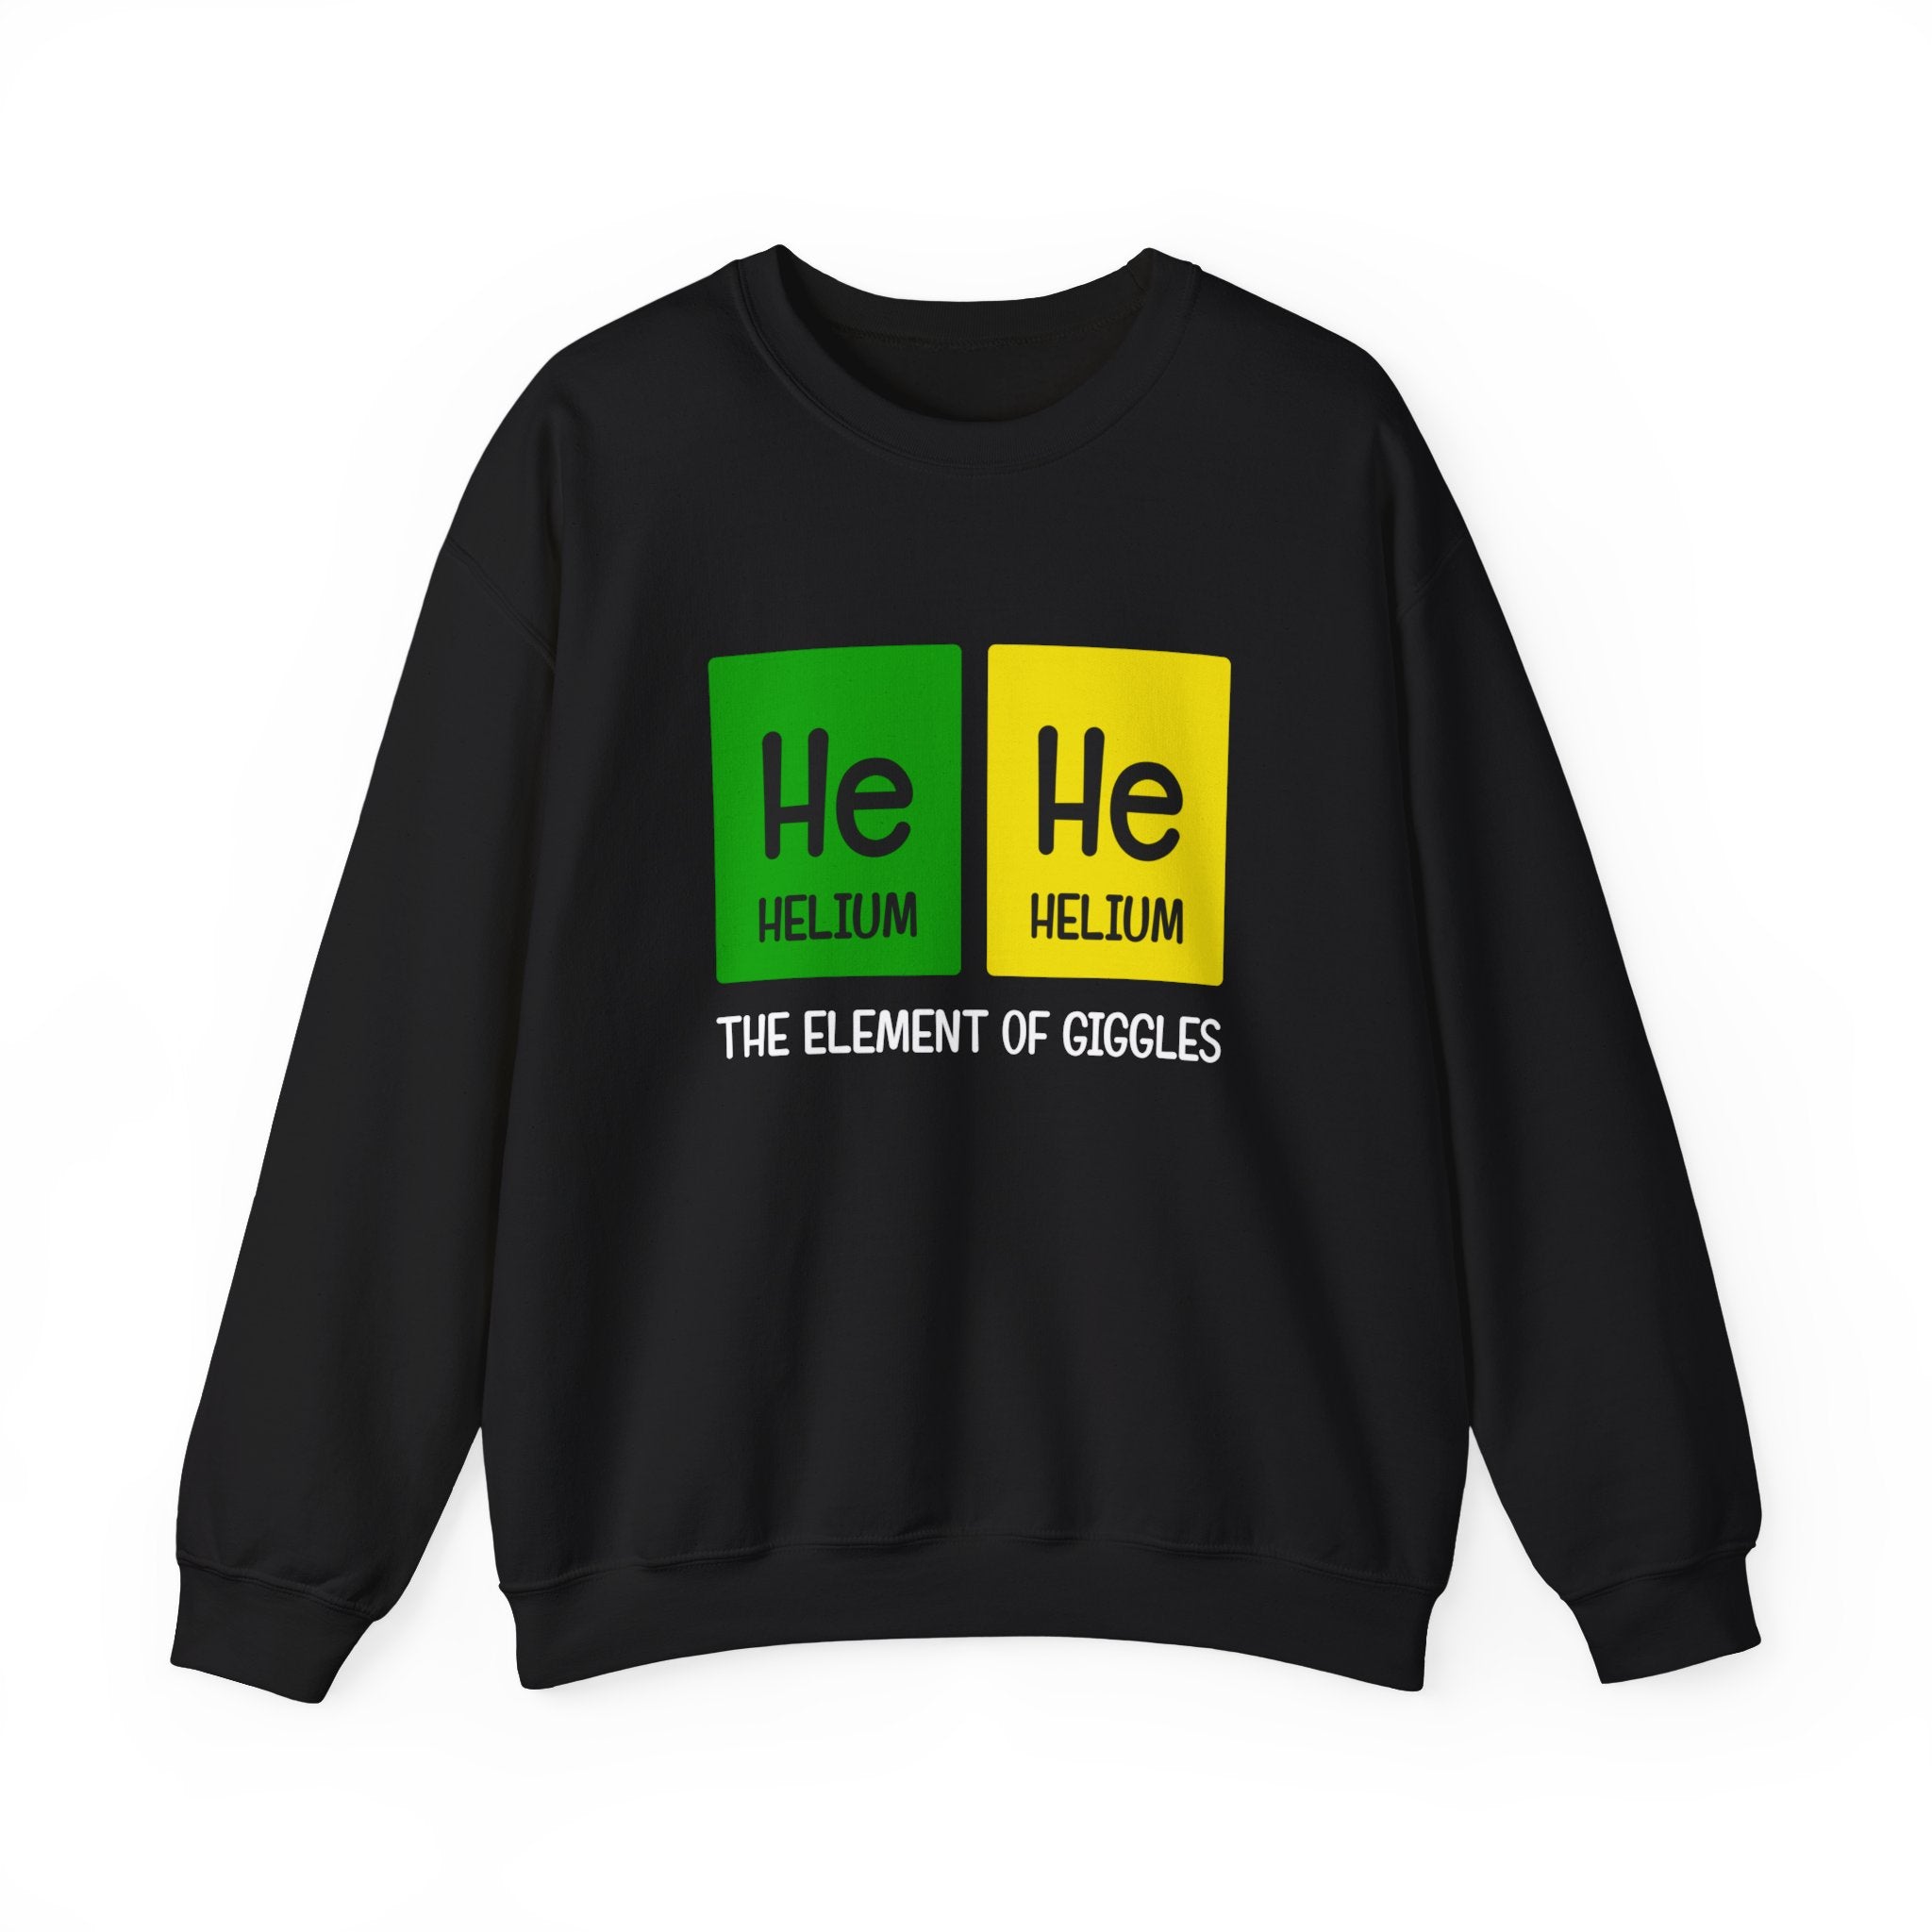 A stylish and warm black He-He - Sweatshirt displays two colored periodic table elements for Helium with the text "He He Helium The Element of Giggles" underneath, offering ultimate coziness.